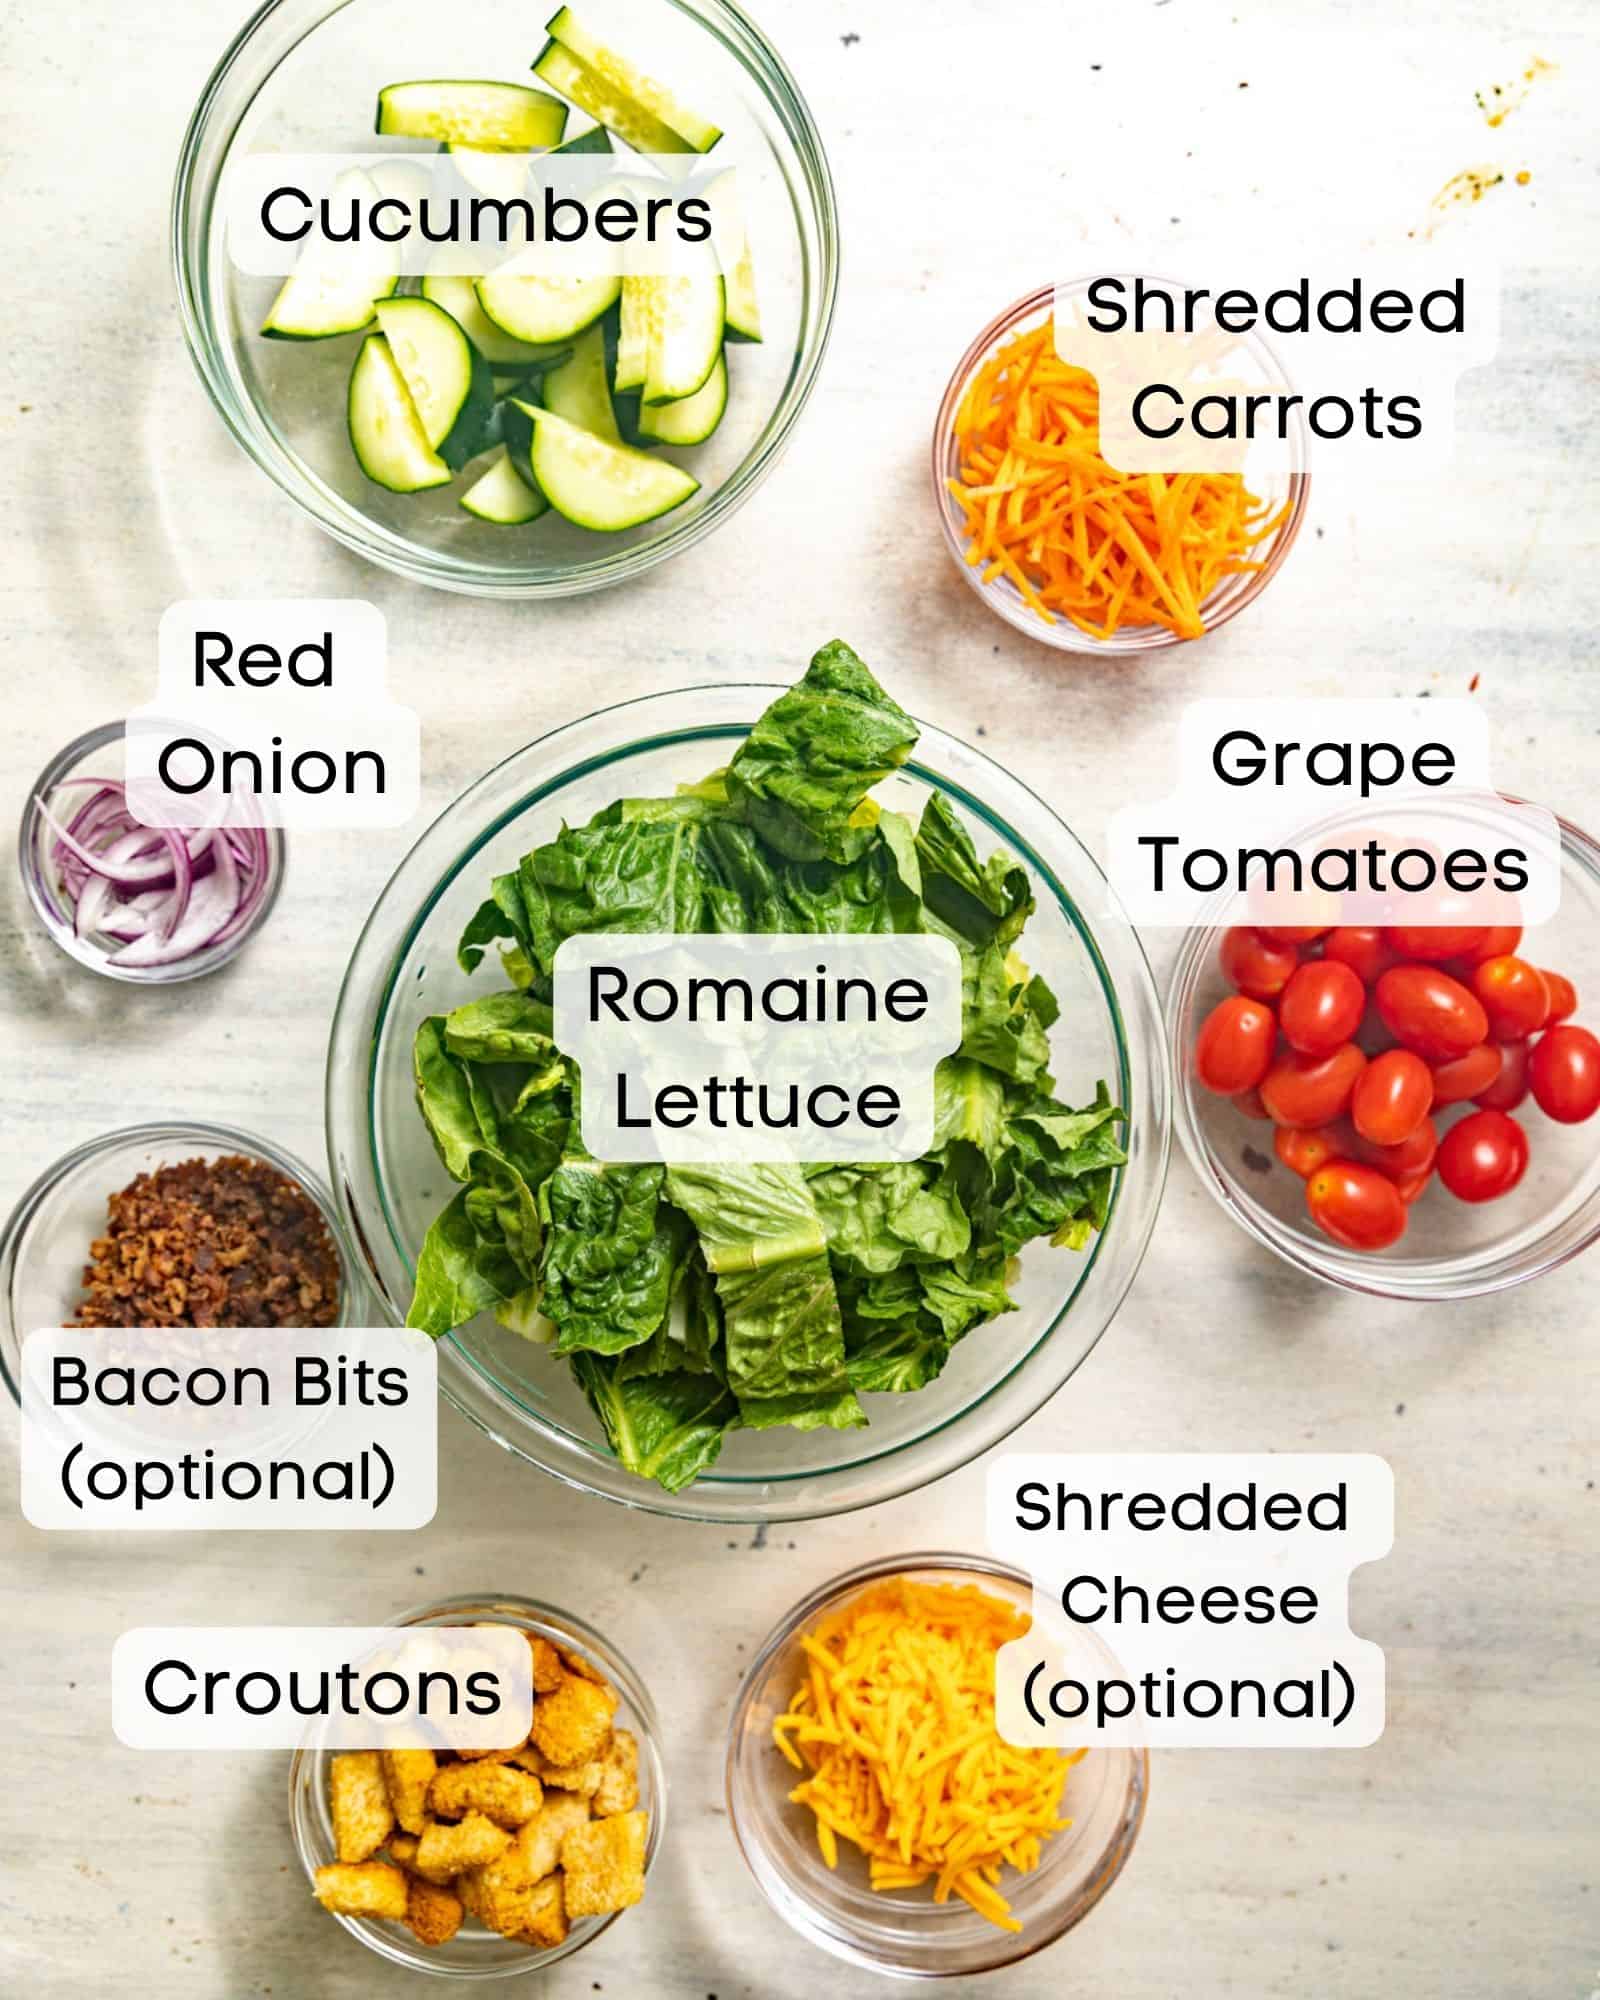 ingredients to make a house salad - lettuce, cucumbers, shredded carrots, red onion, tomatoes, bacon bits, shredded cheese, and croutons.